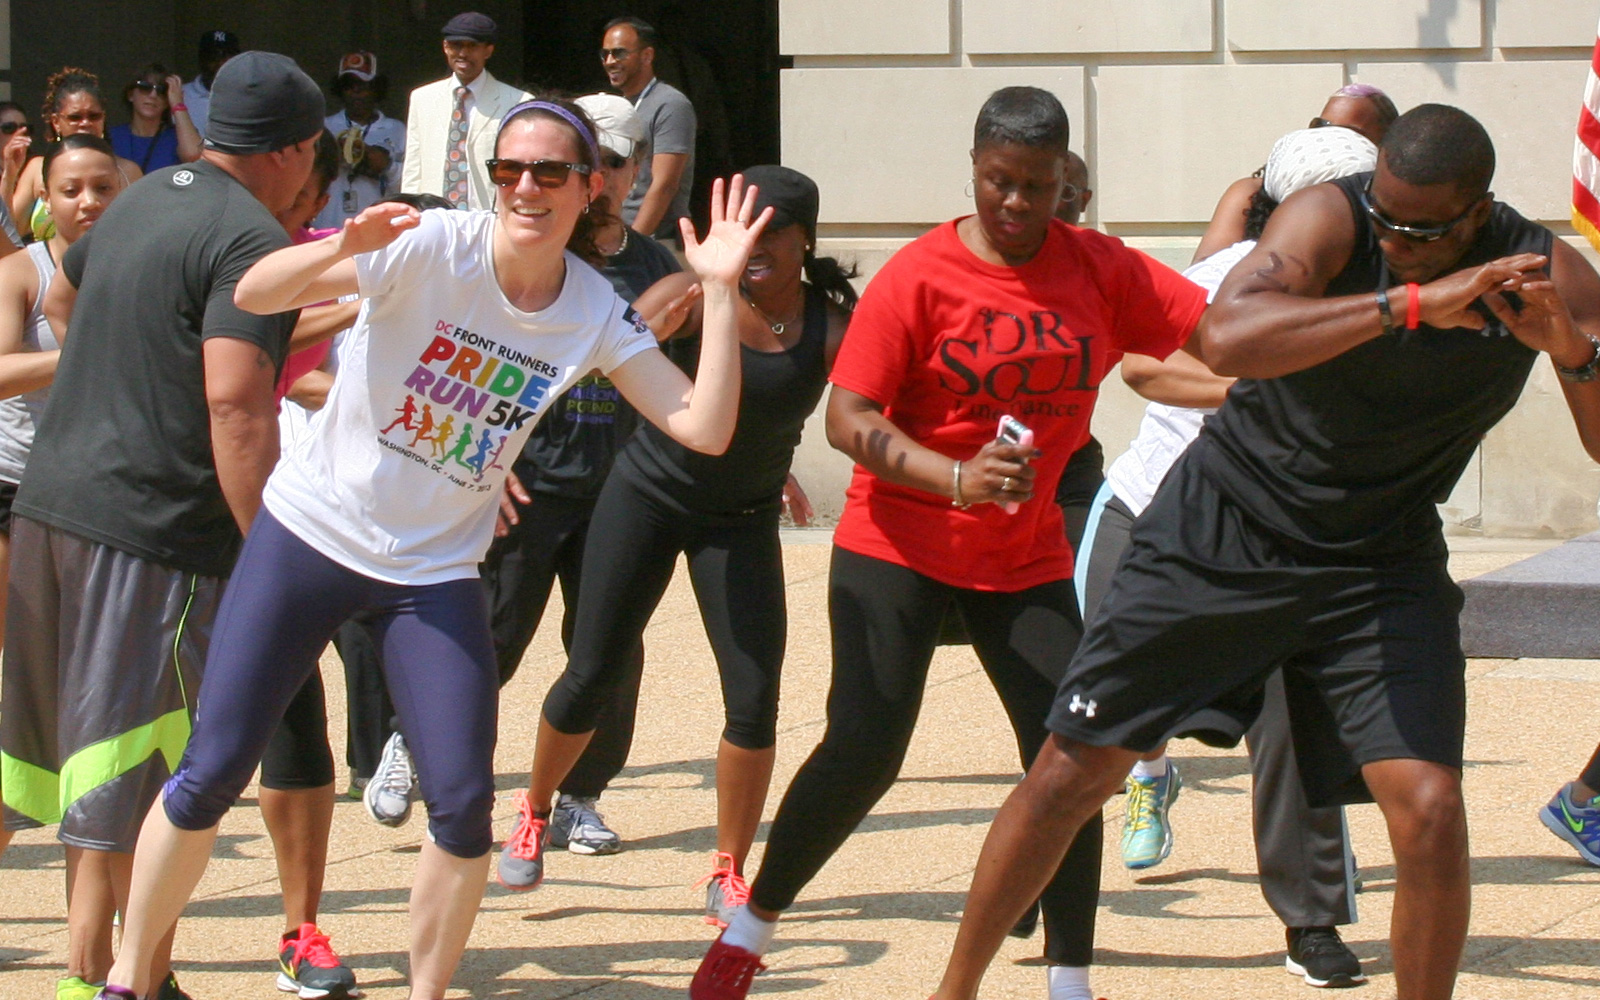 Group of EPA employees participating in outdoors synchonized aerobic dance exercises in an urban environment on a sunny day